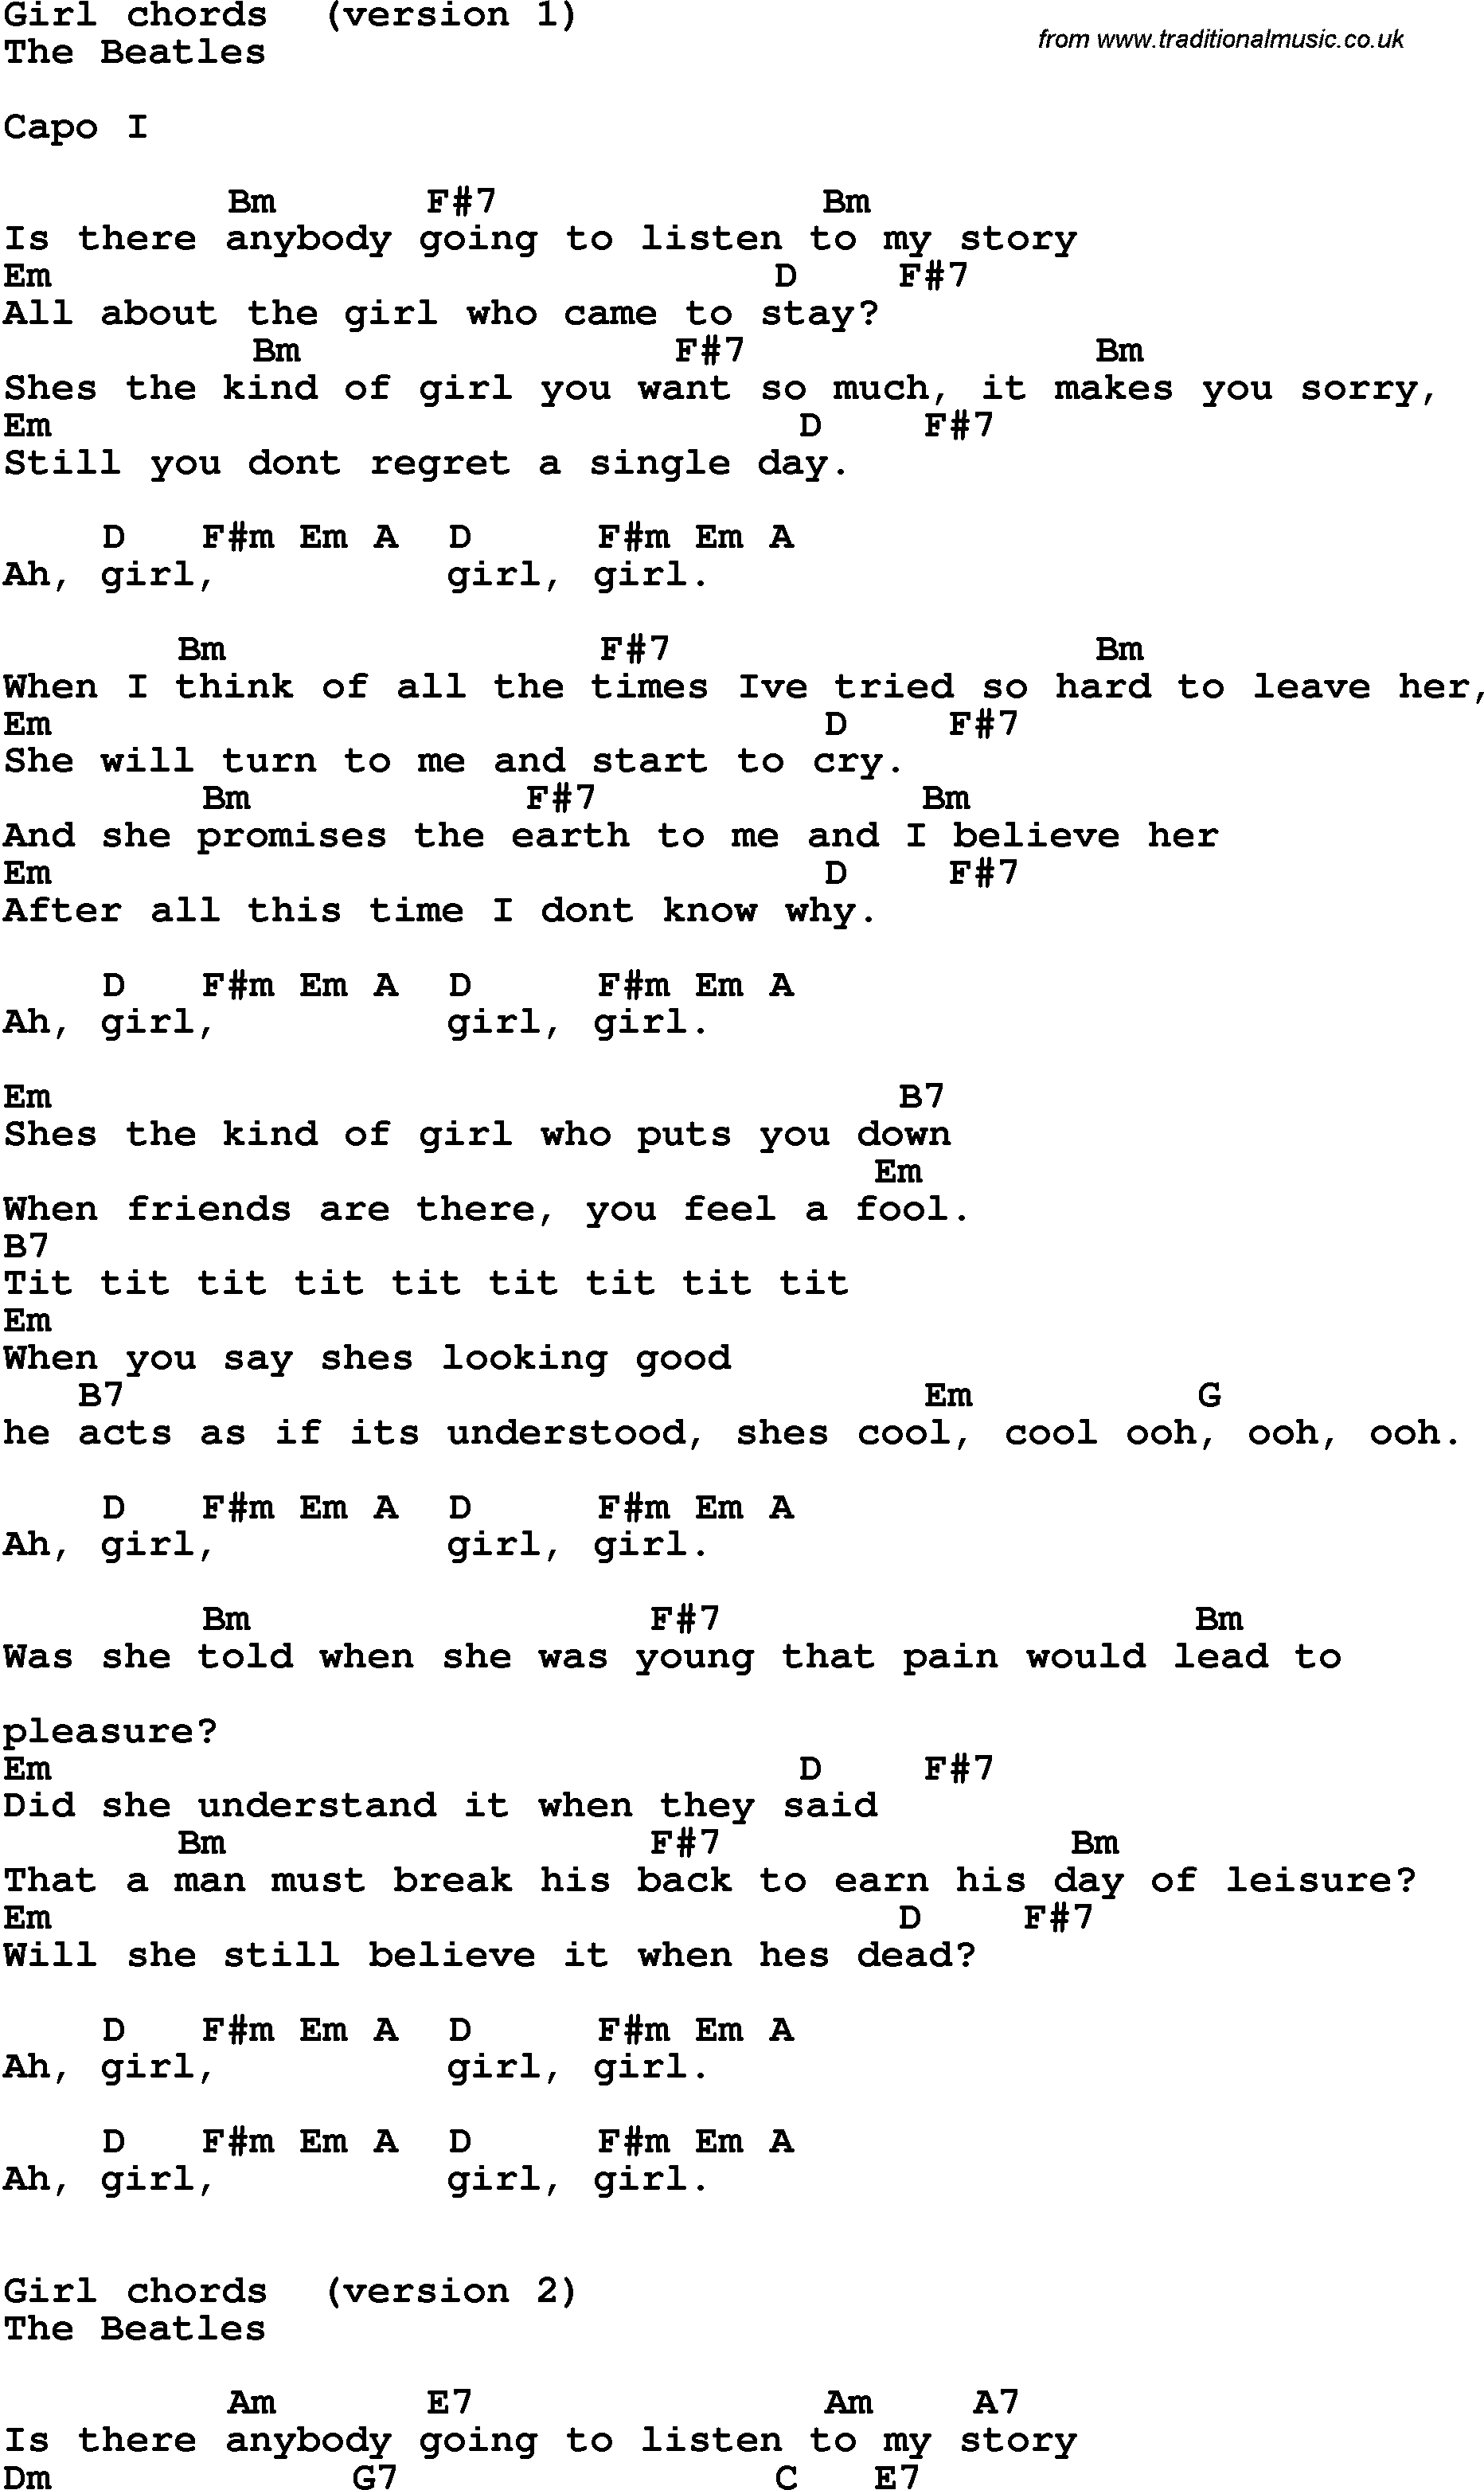 Song Lyrics with guitar chords for Girl - The Beatles